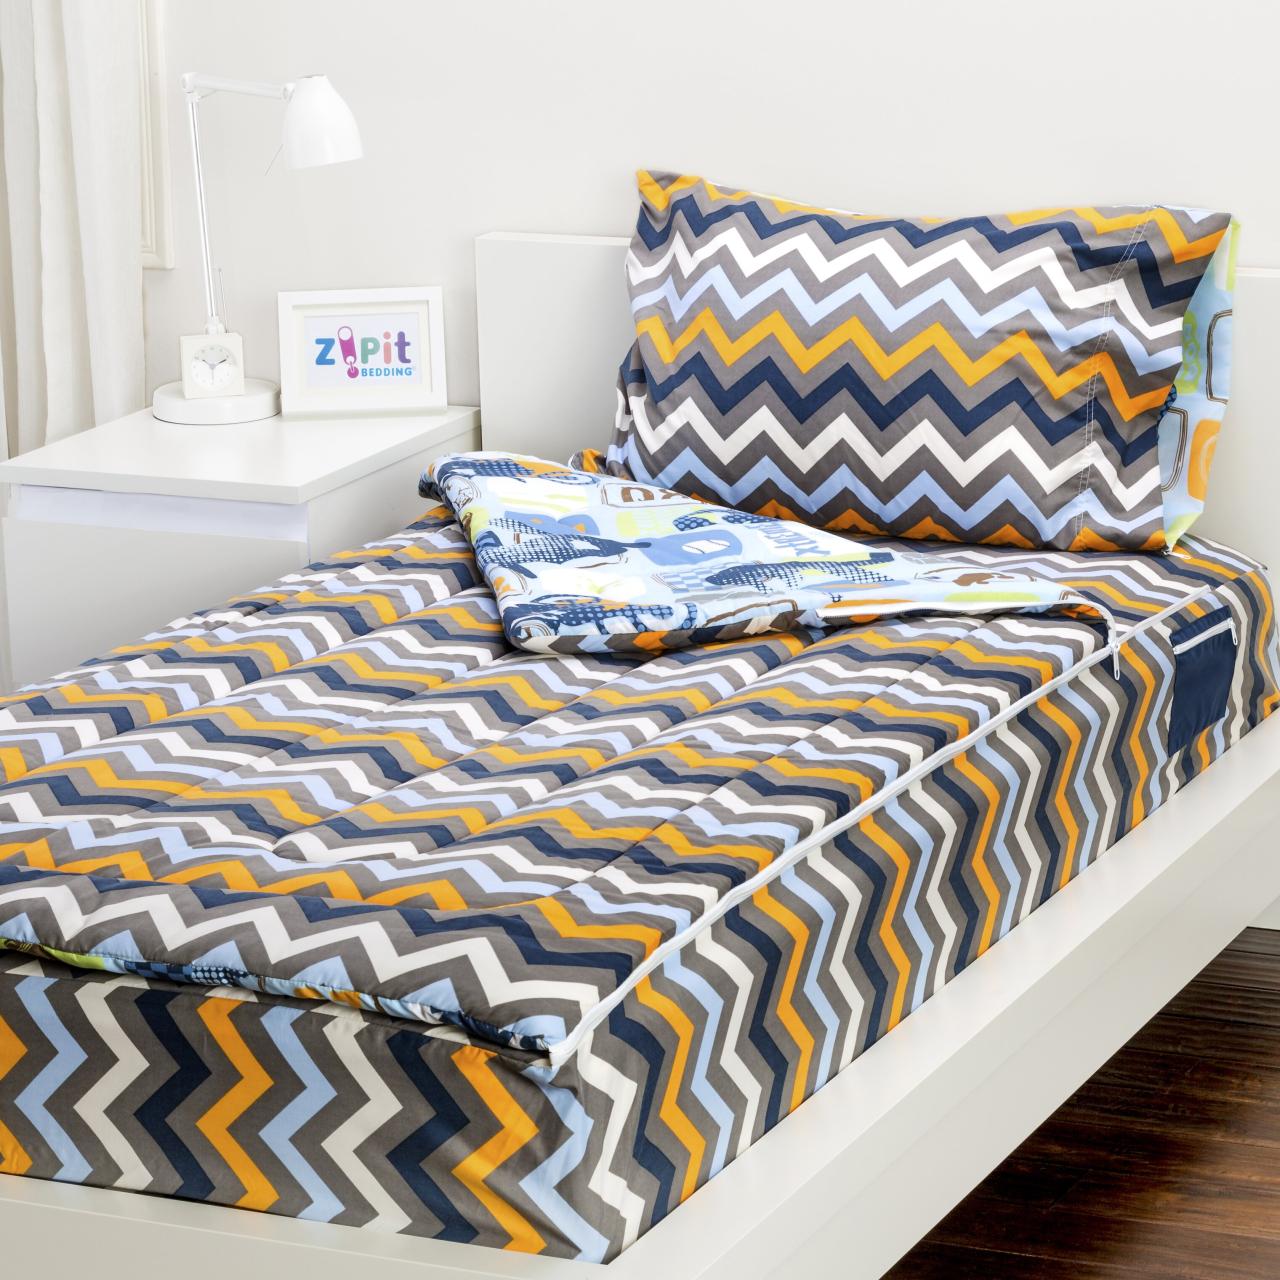 Zipit bedding extreme sports twin